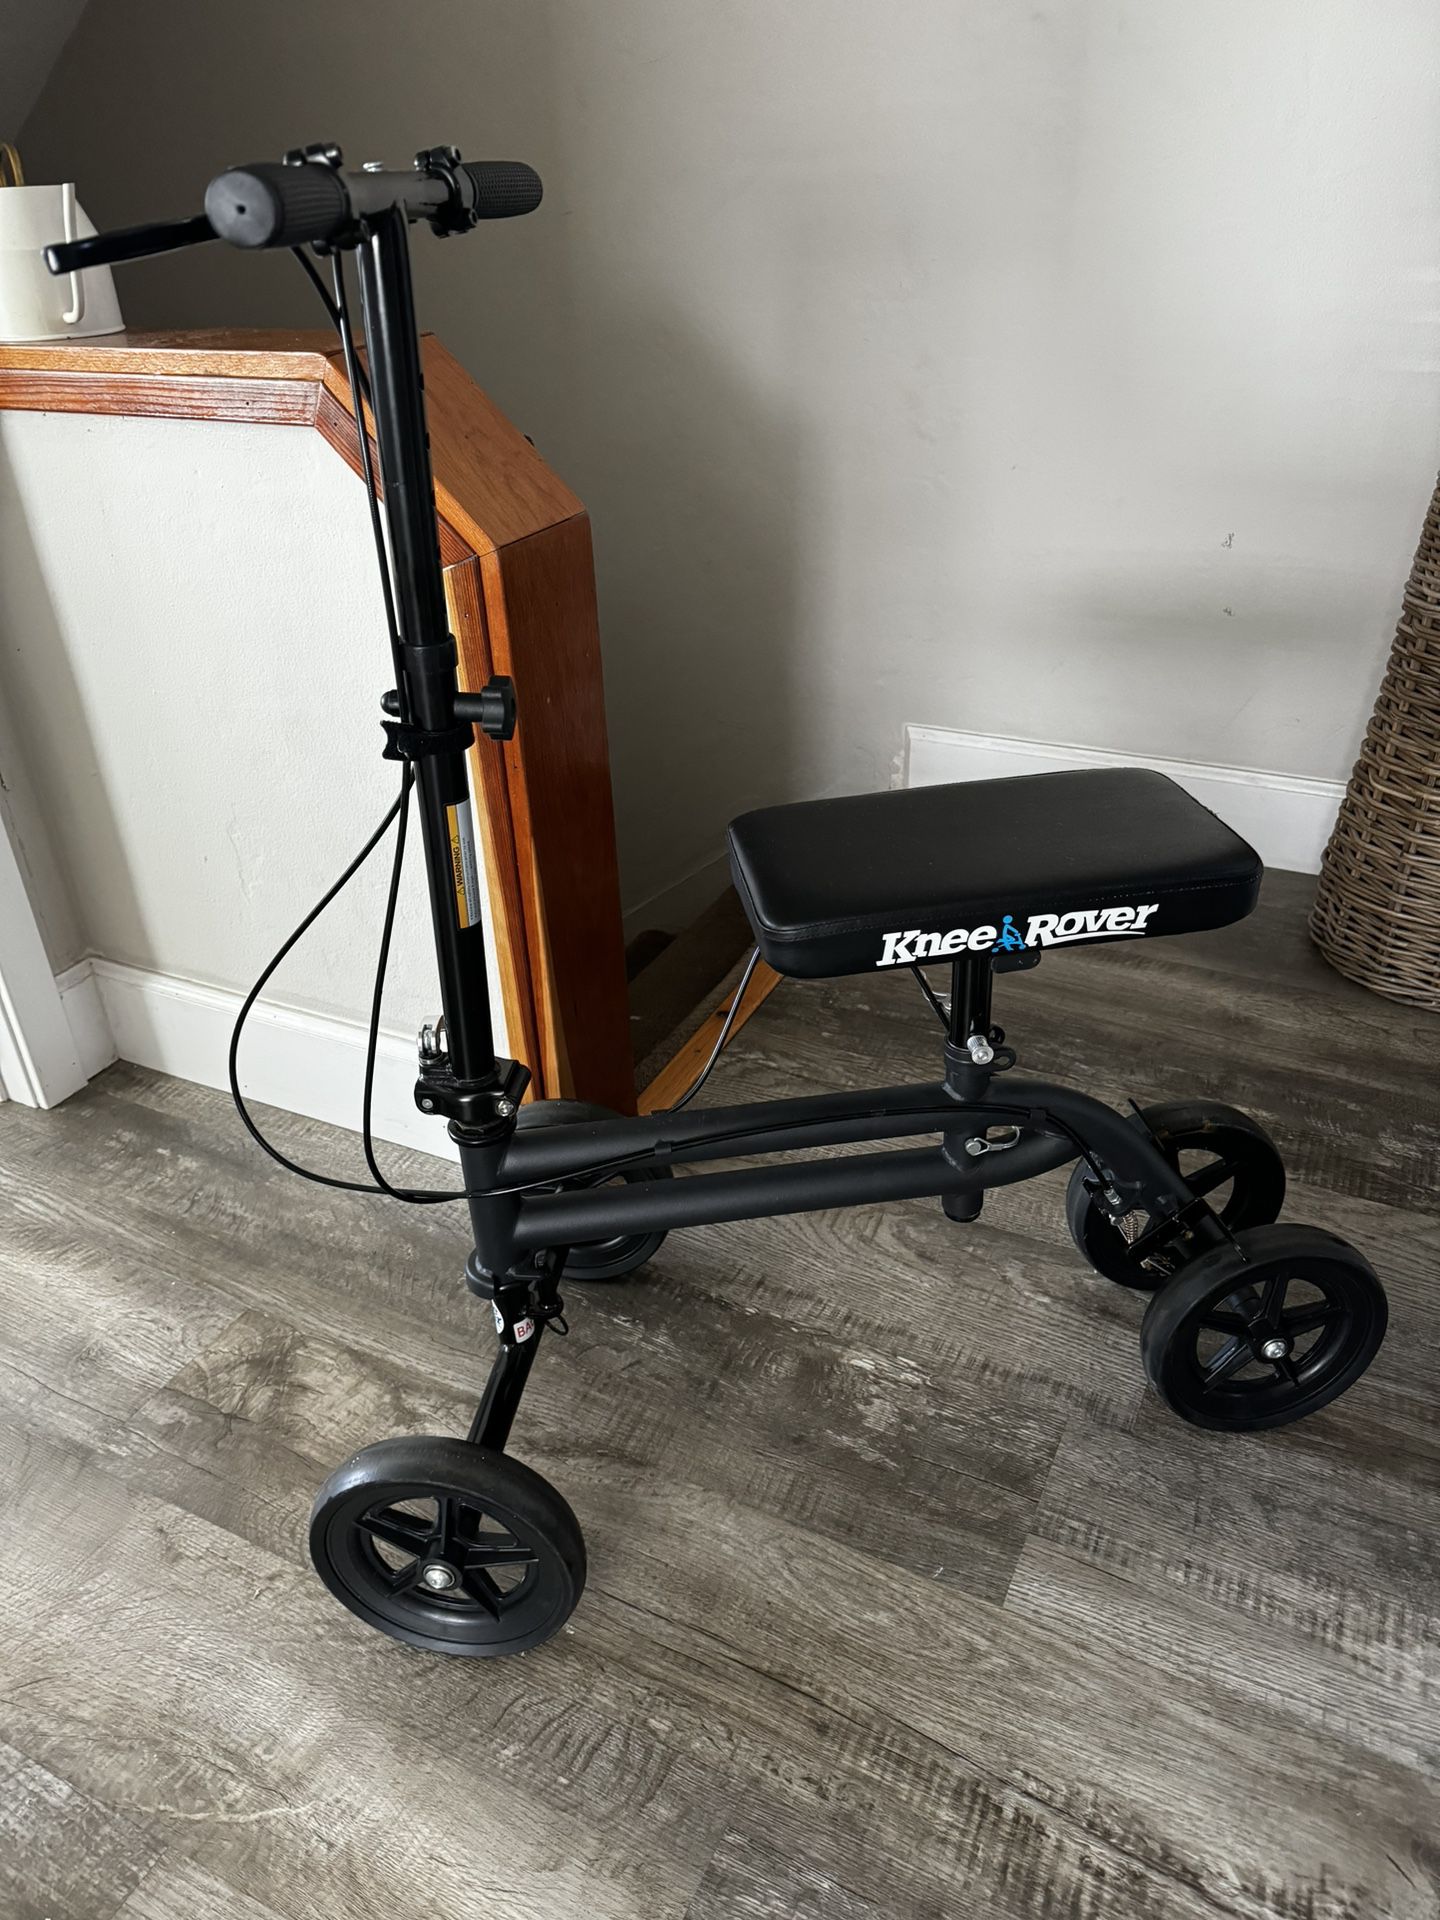 Knee Rover Knee scooter 